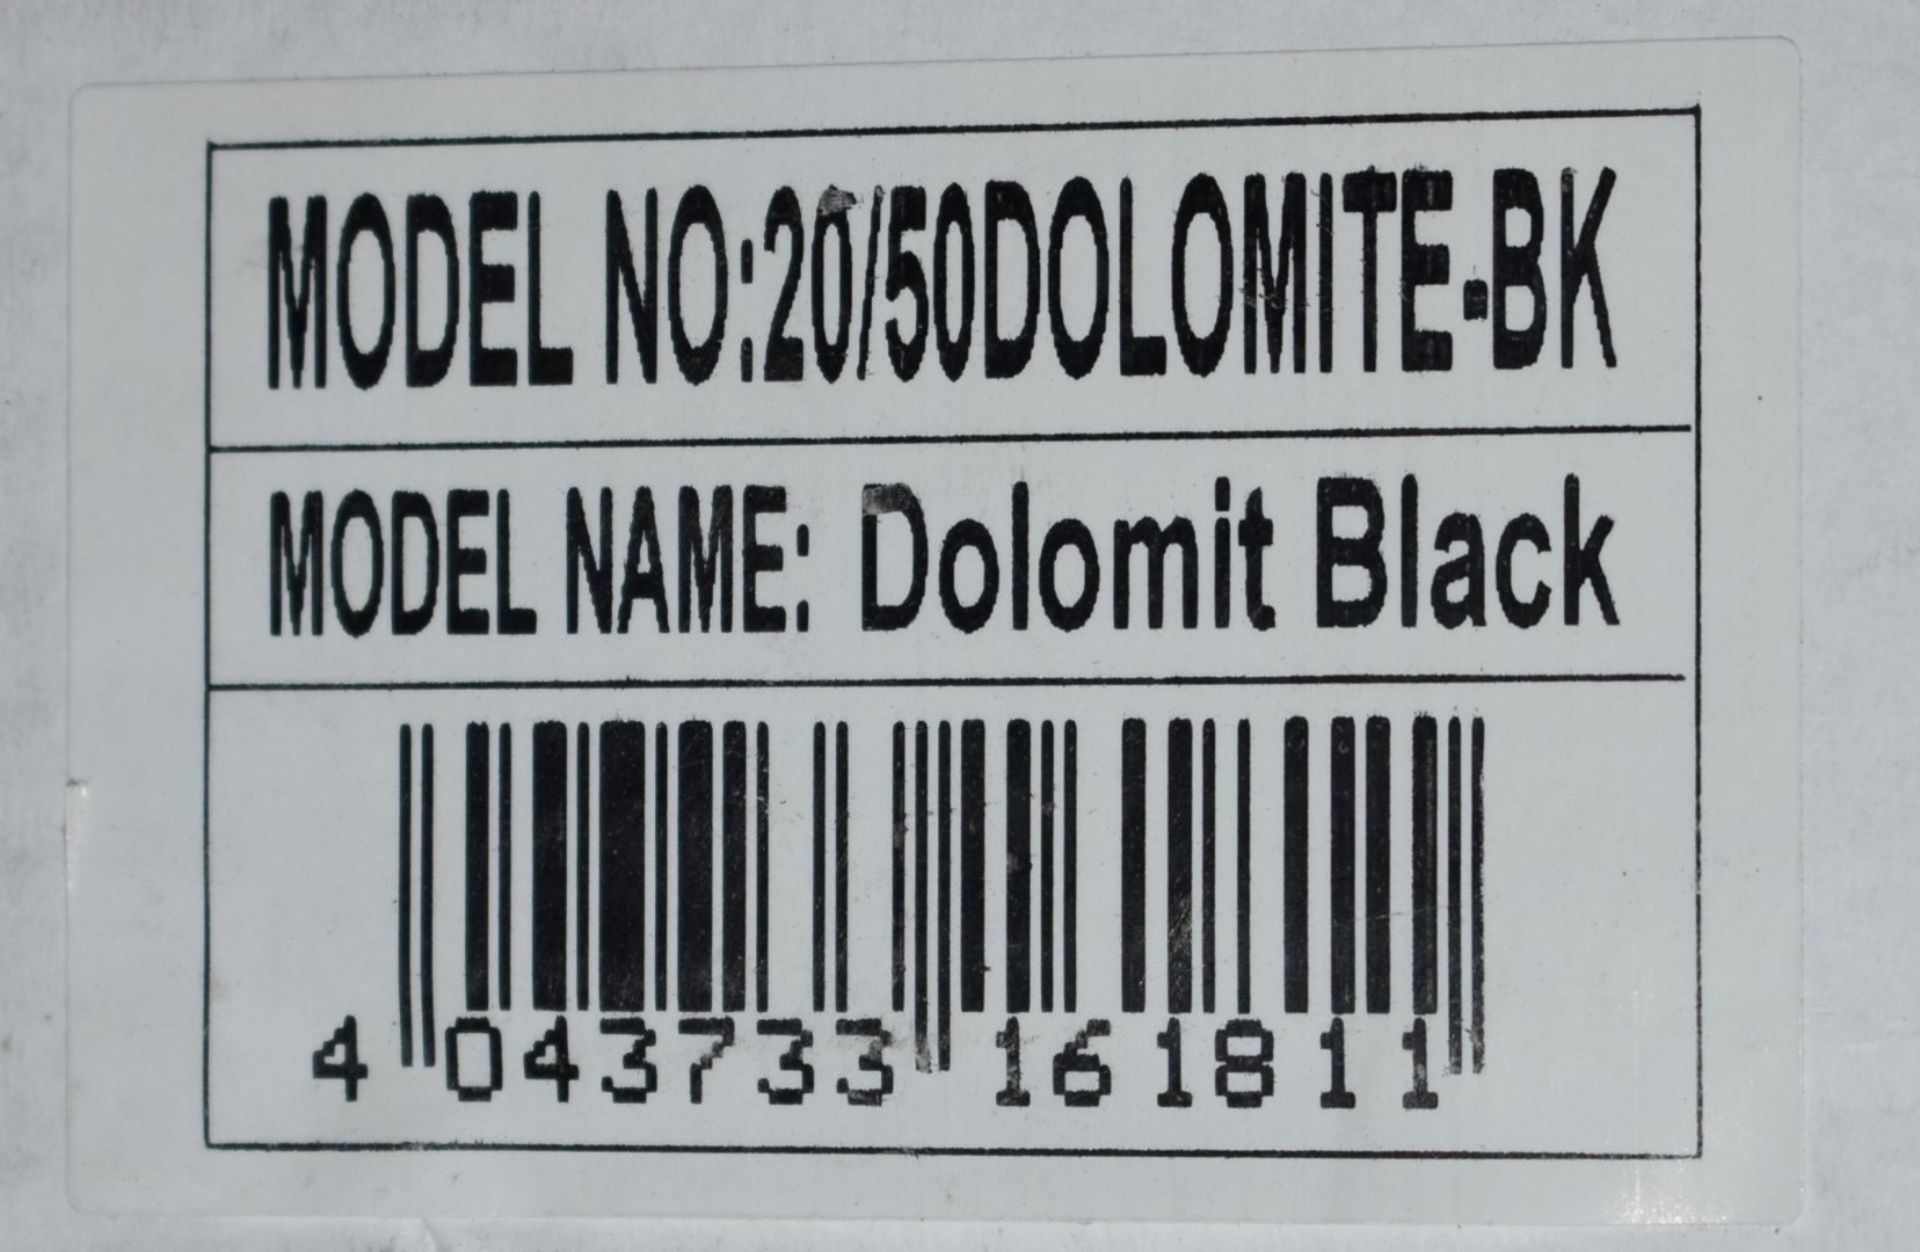 18 x Boxes of RAK Porcelain Floor or Wall Tiles - Dolomite Black - 20 x 50 cm Tiles Covering a Total - Image 6 of 9